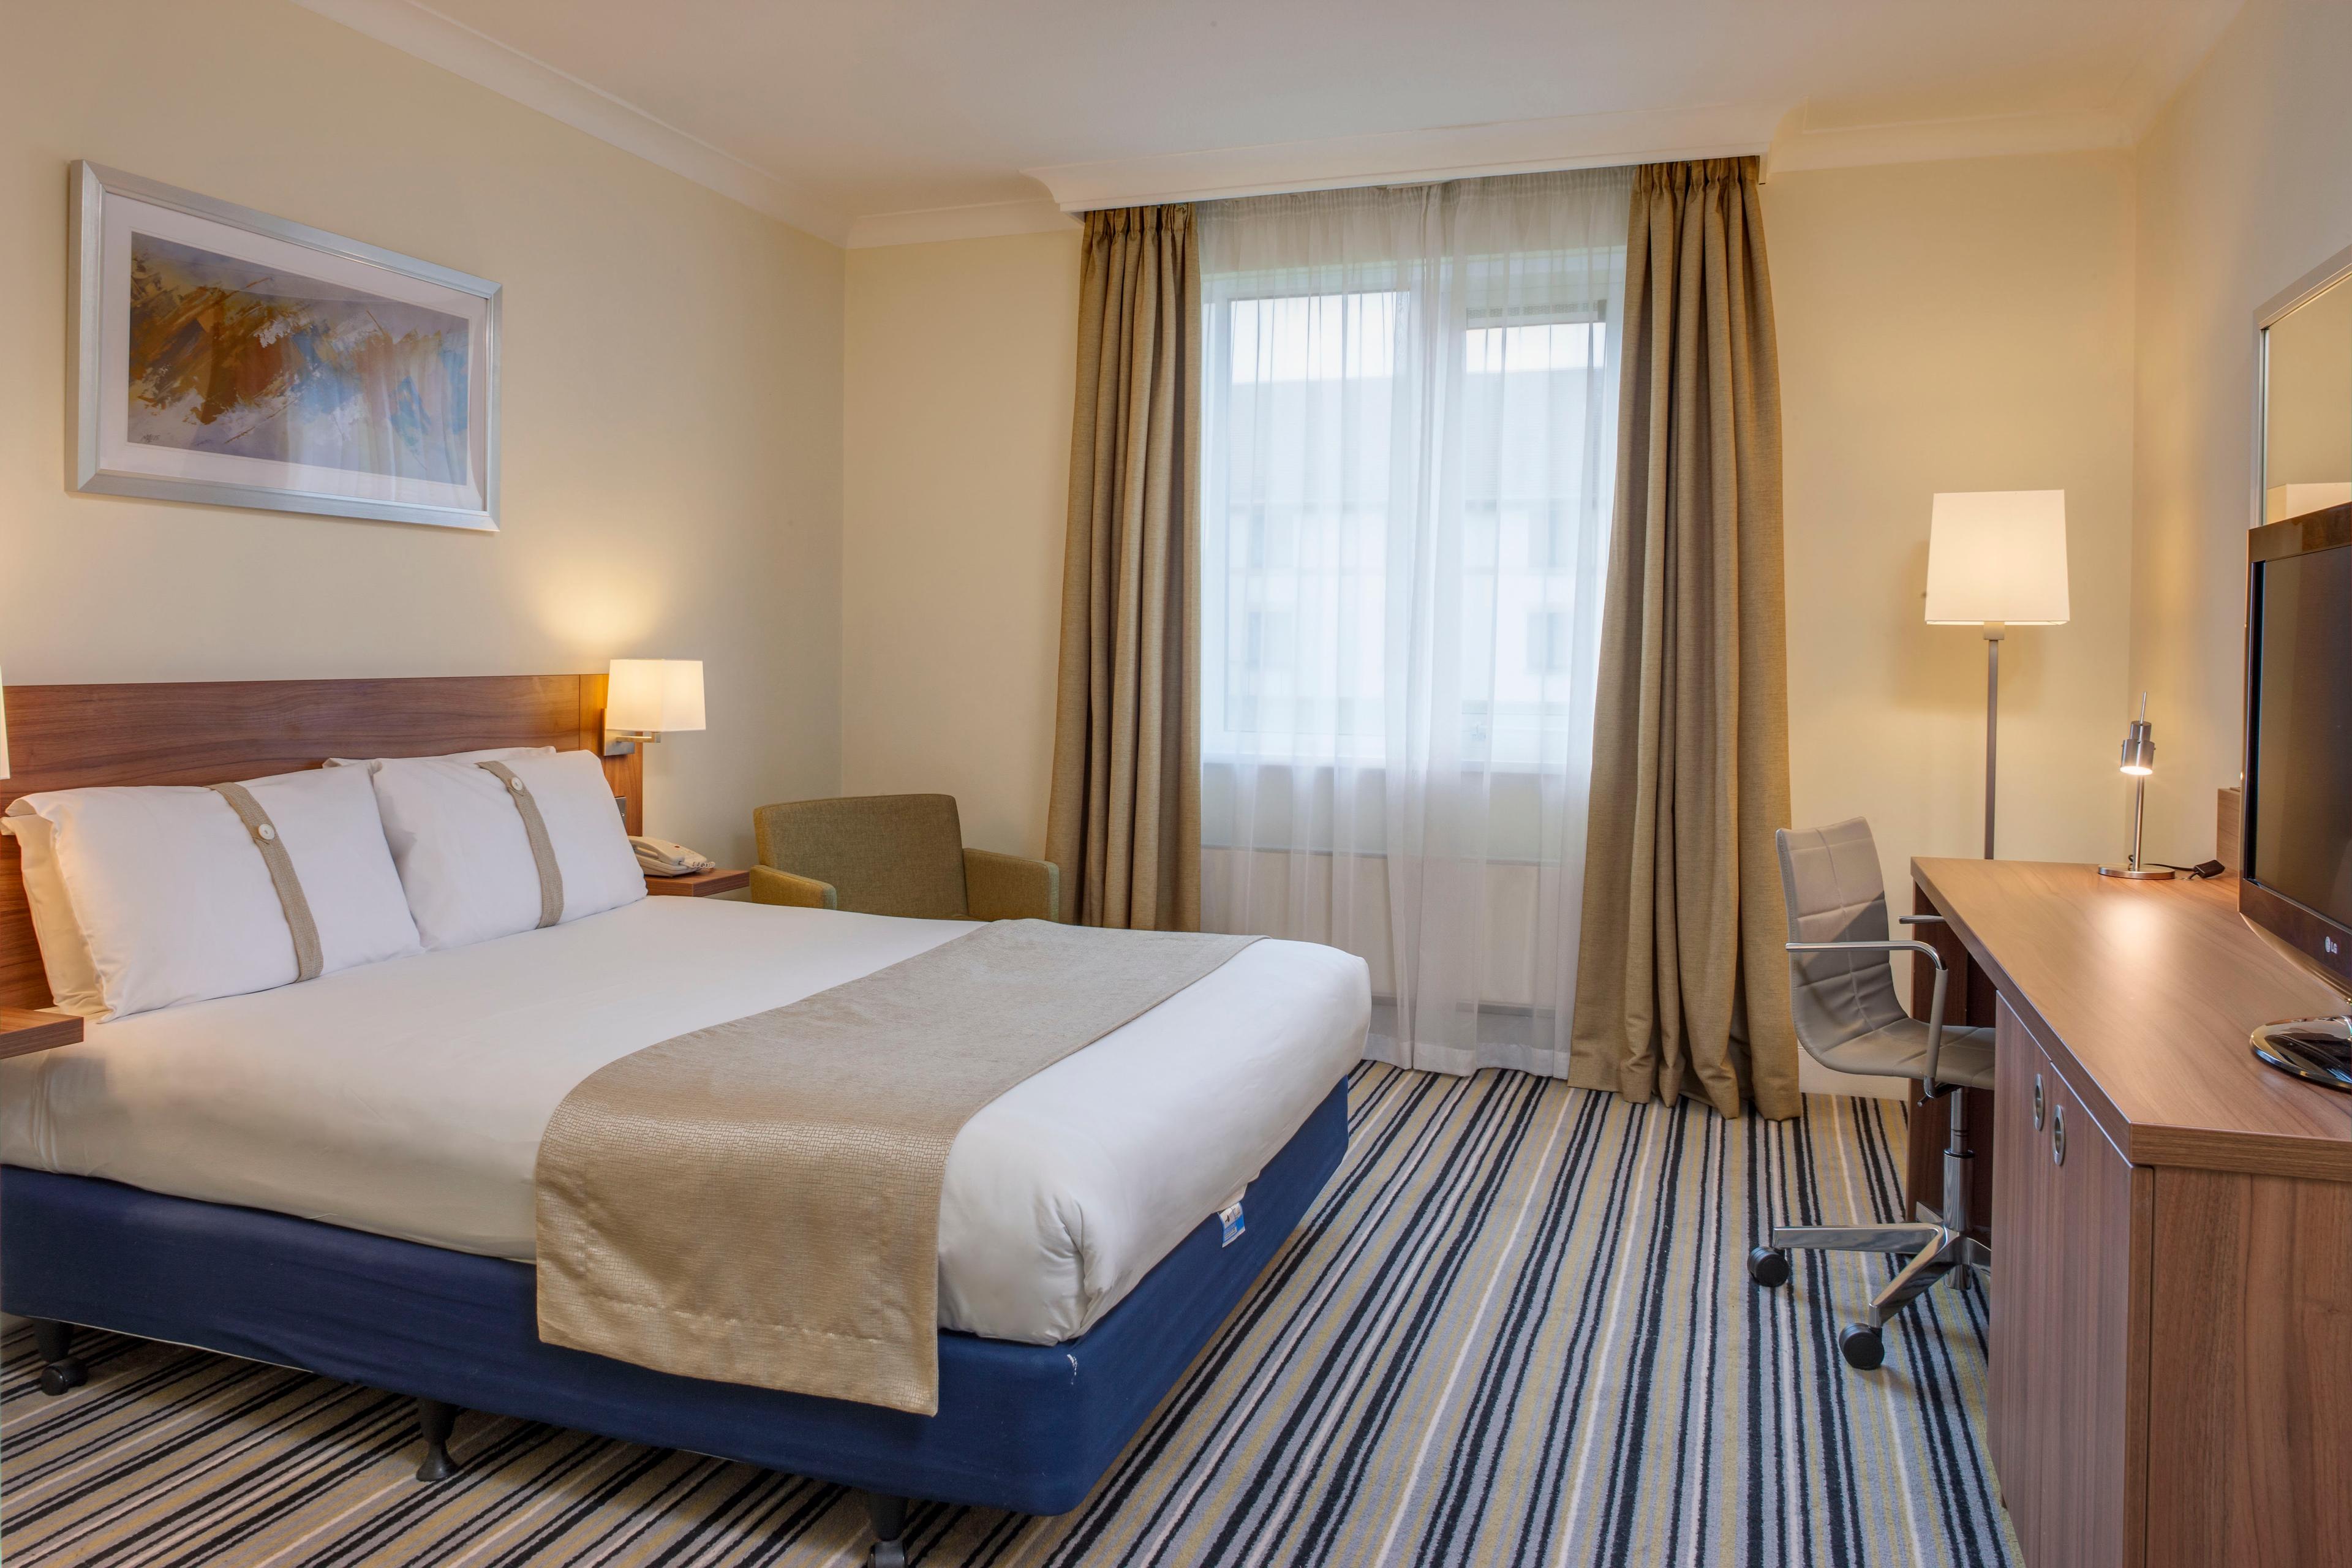 Enjoy your stay in our relaxing, comfortable Guest Room